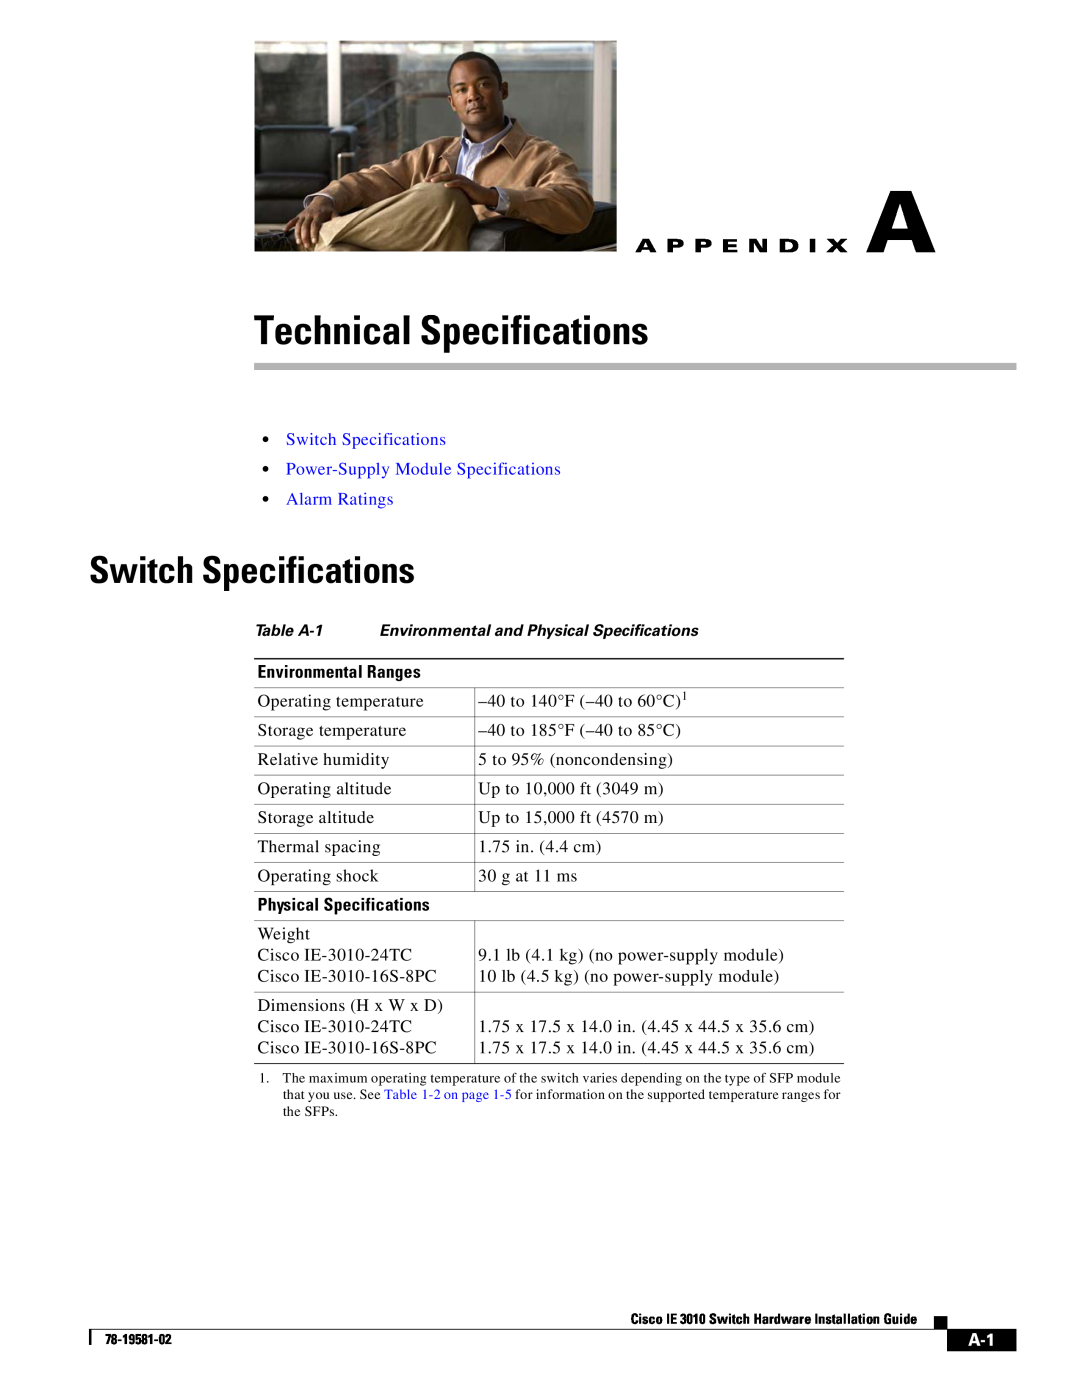 Cisco Systems IE301024TC manual Technical Specifications, Switch Specifications, A P P E N D I X A, Alarm Ratings 